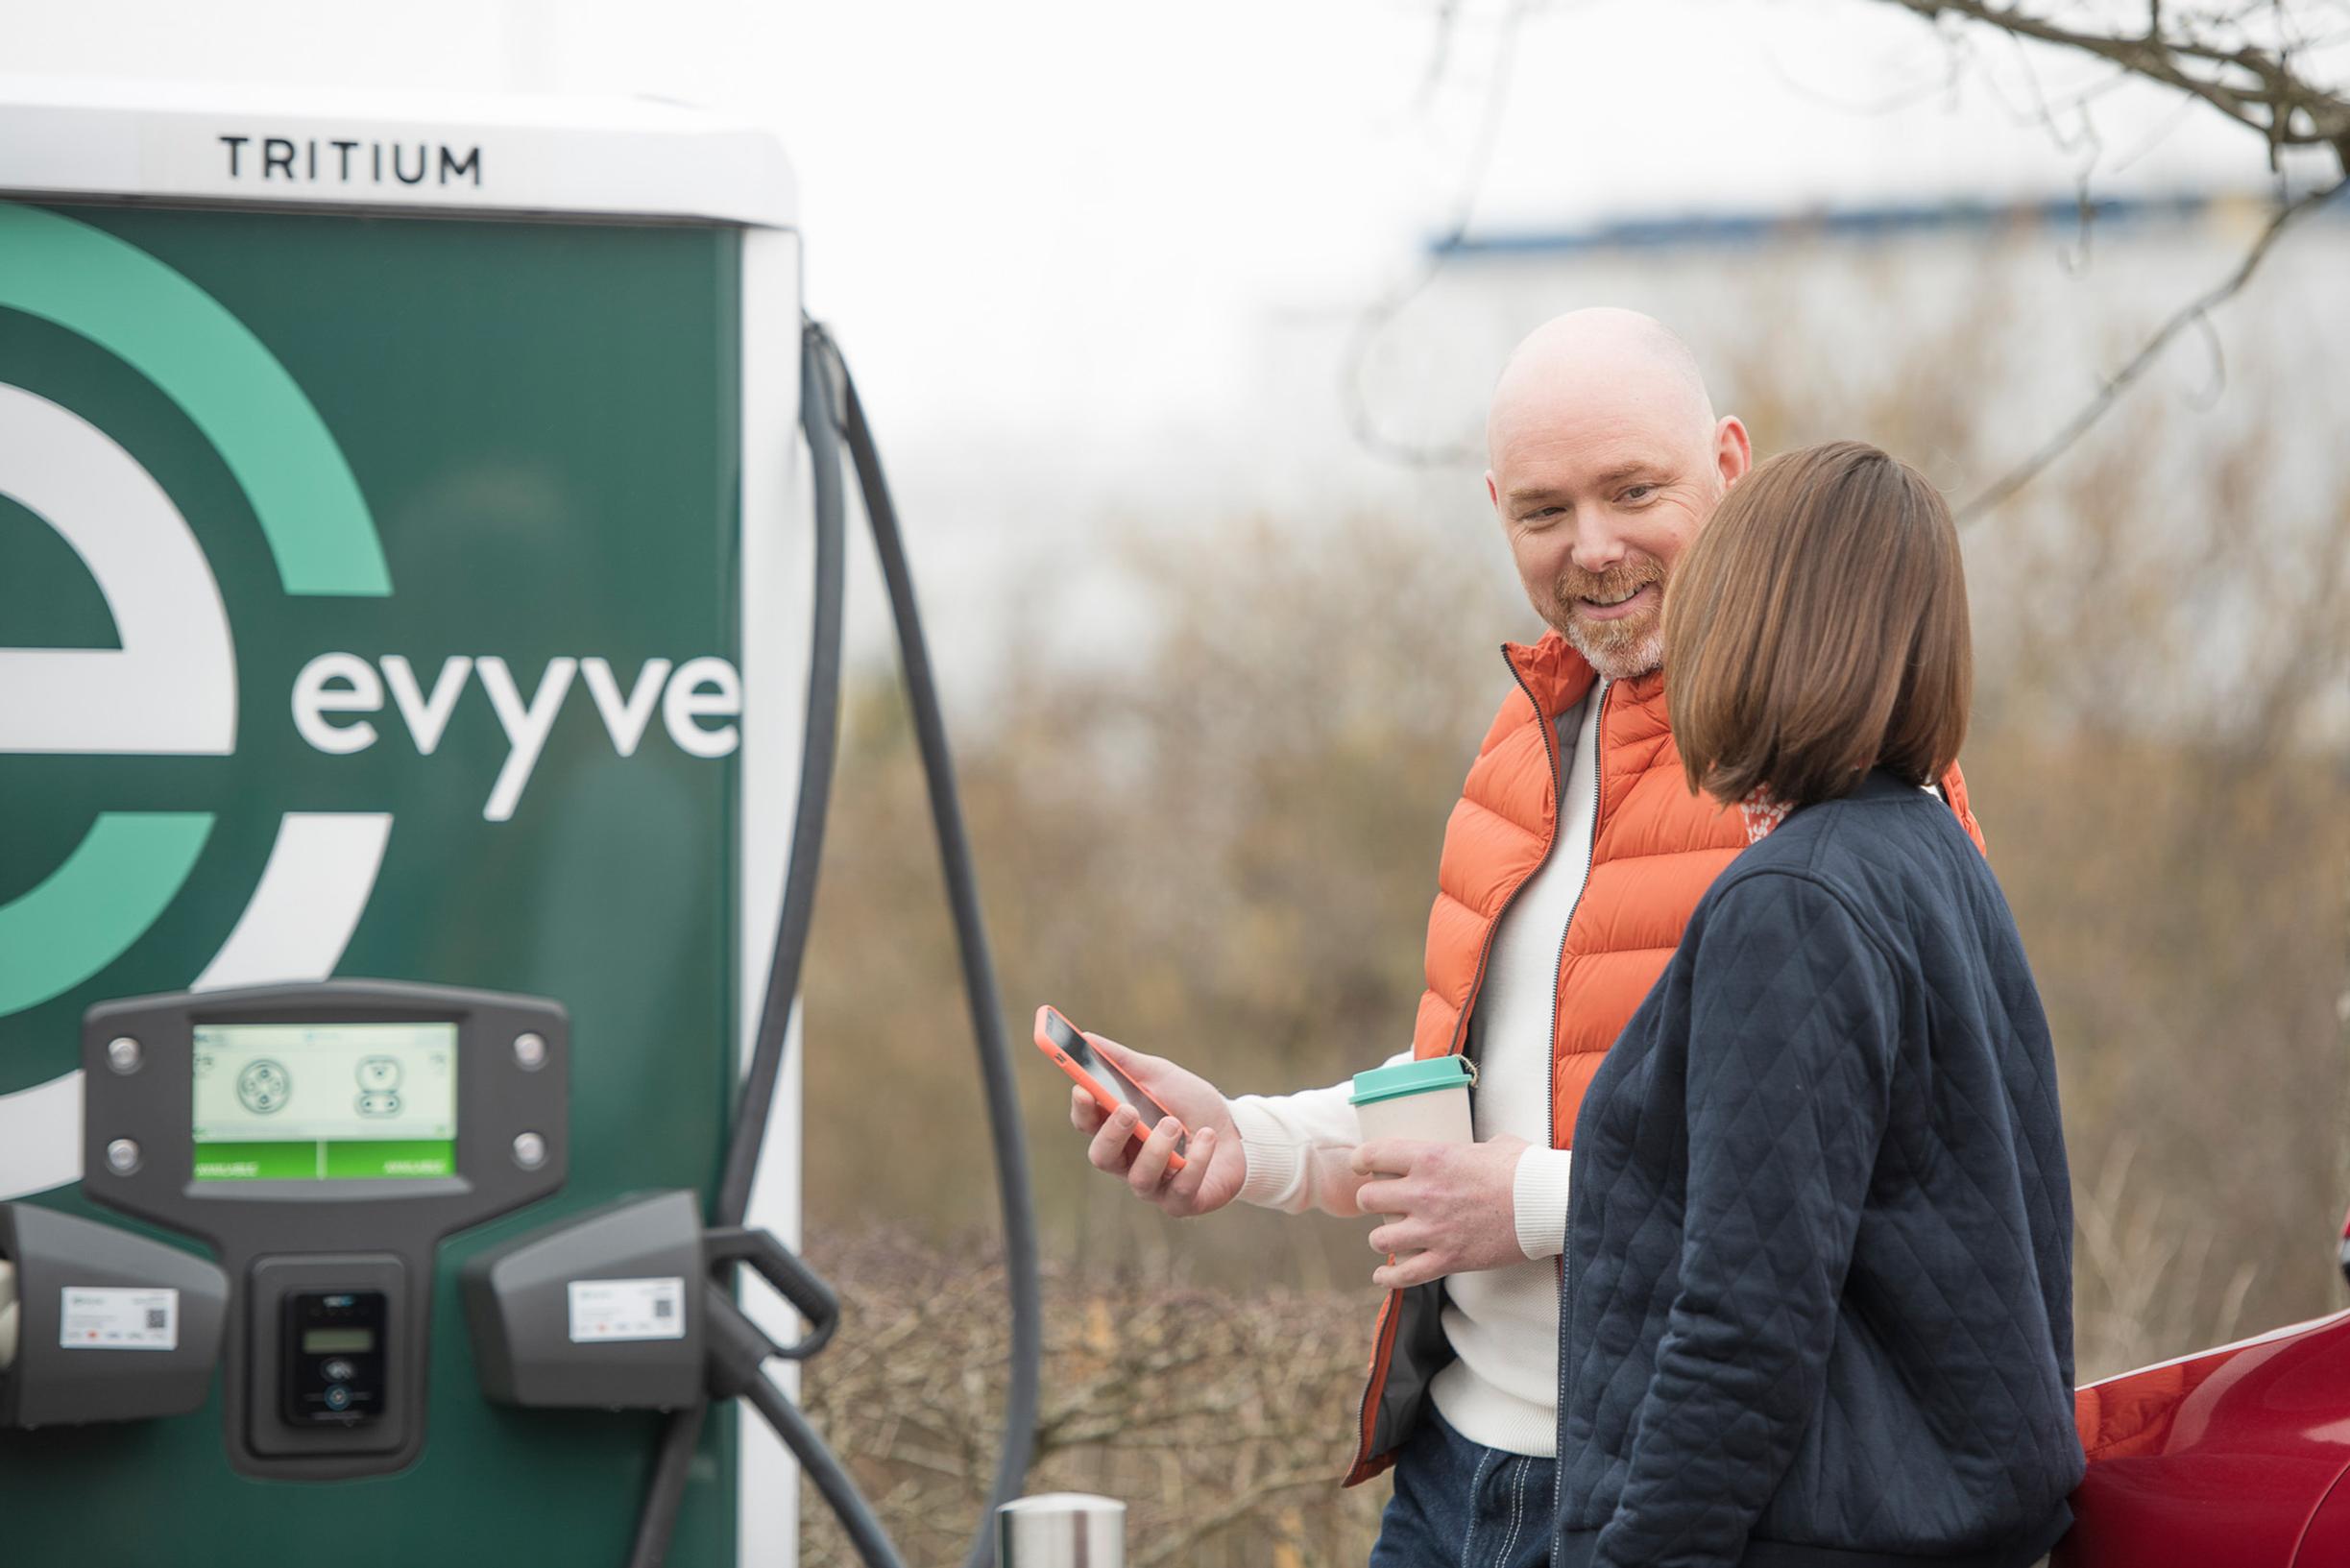 En-route charging network Evyve goes live on Zap-Pay